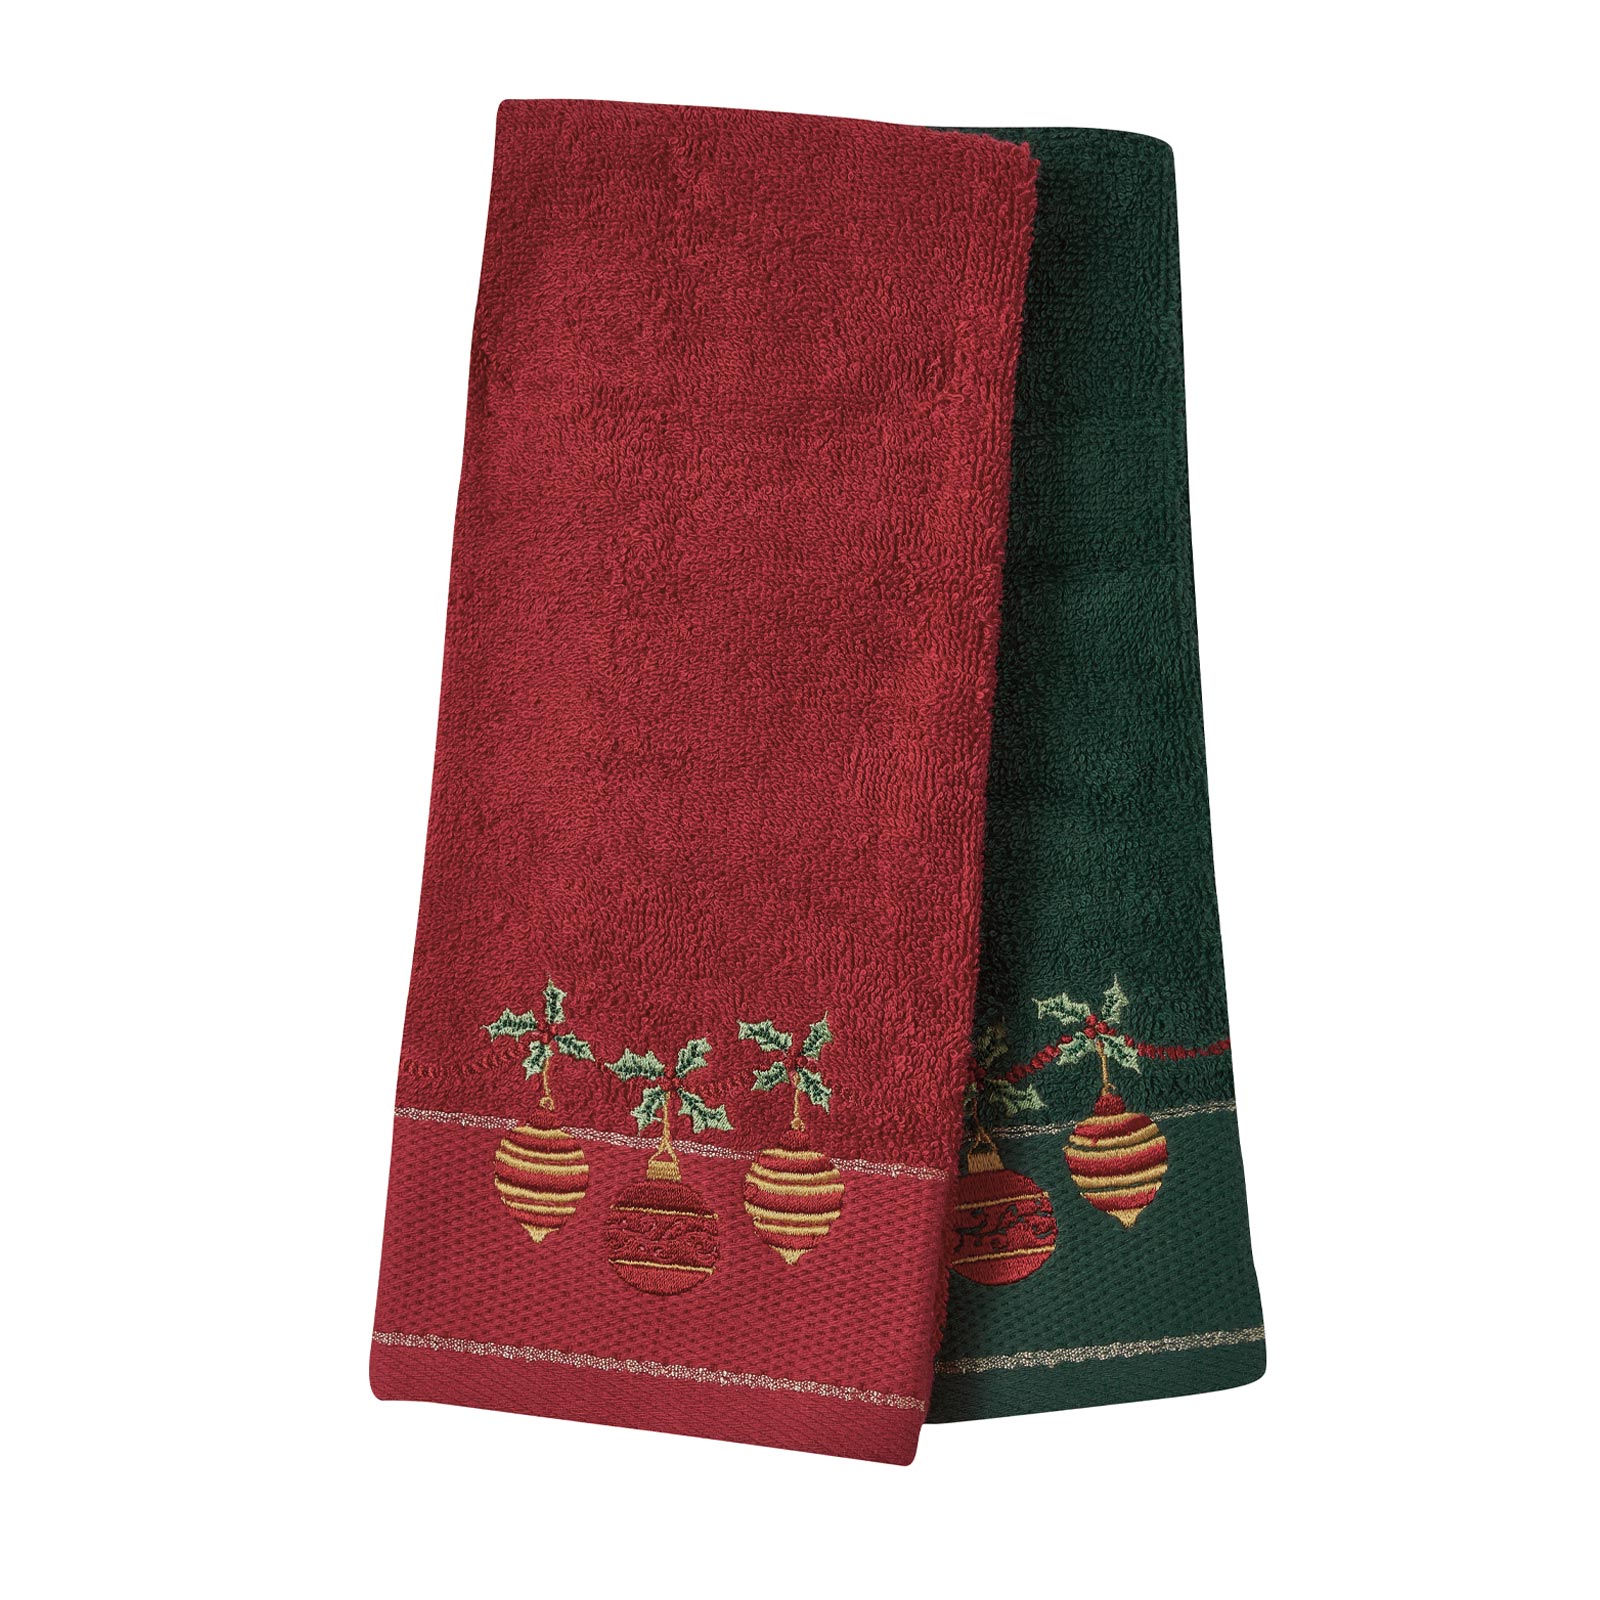 DAS HOME CHRISTMAS ΠΟΤΗΡΟΠΑΝΑ ΣΕΤ 2ΤΜΧ 40X60 0703 GREEN, RED-527040600703